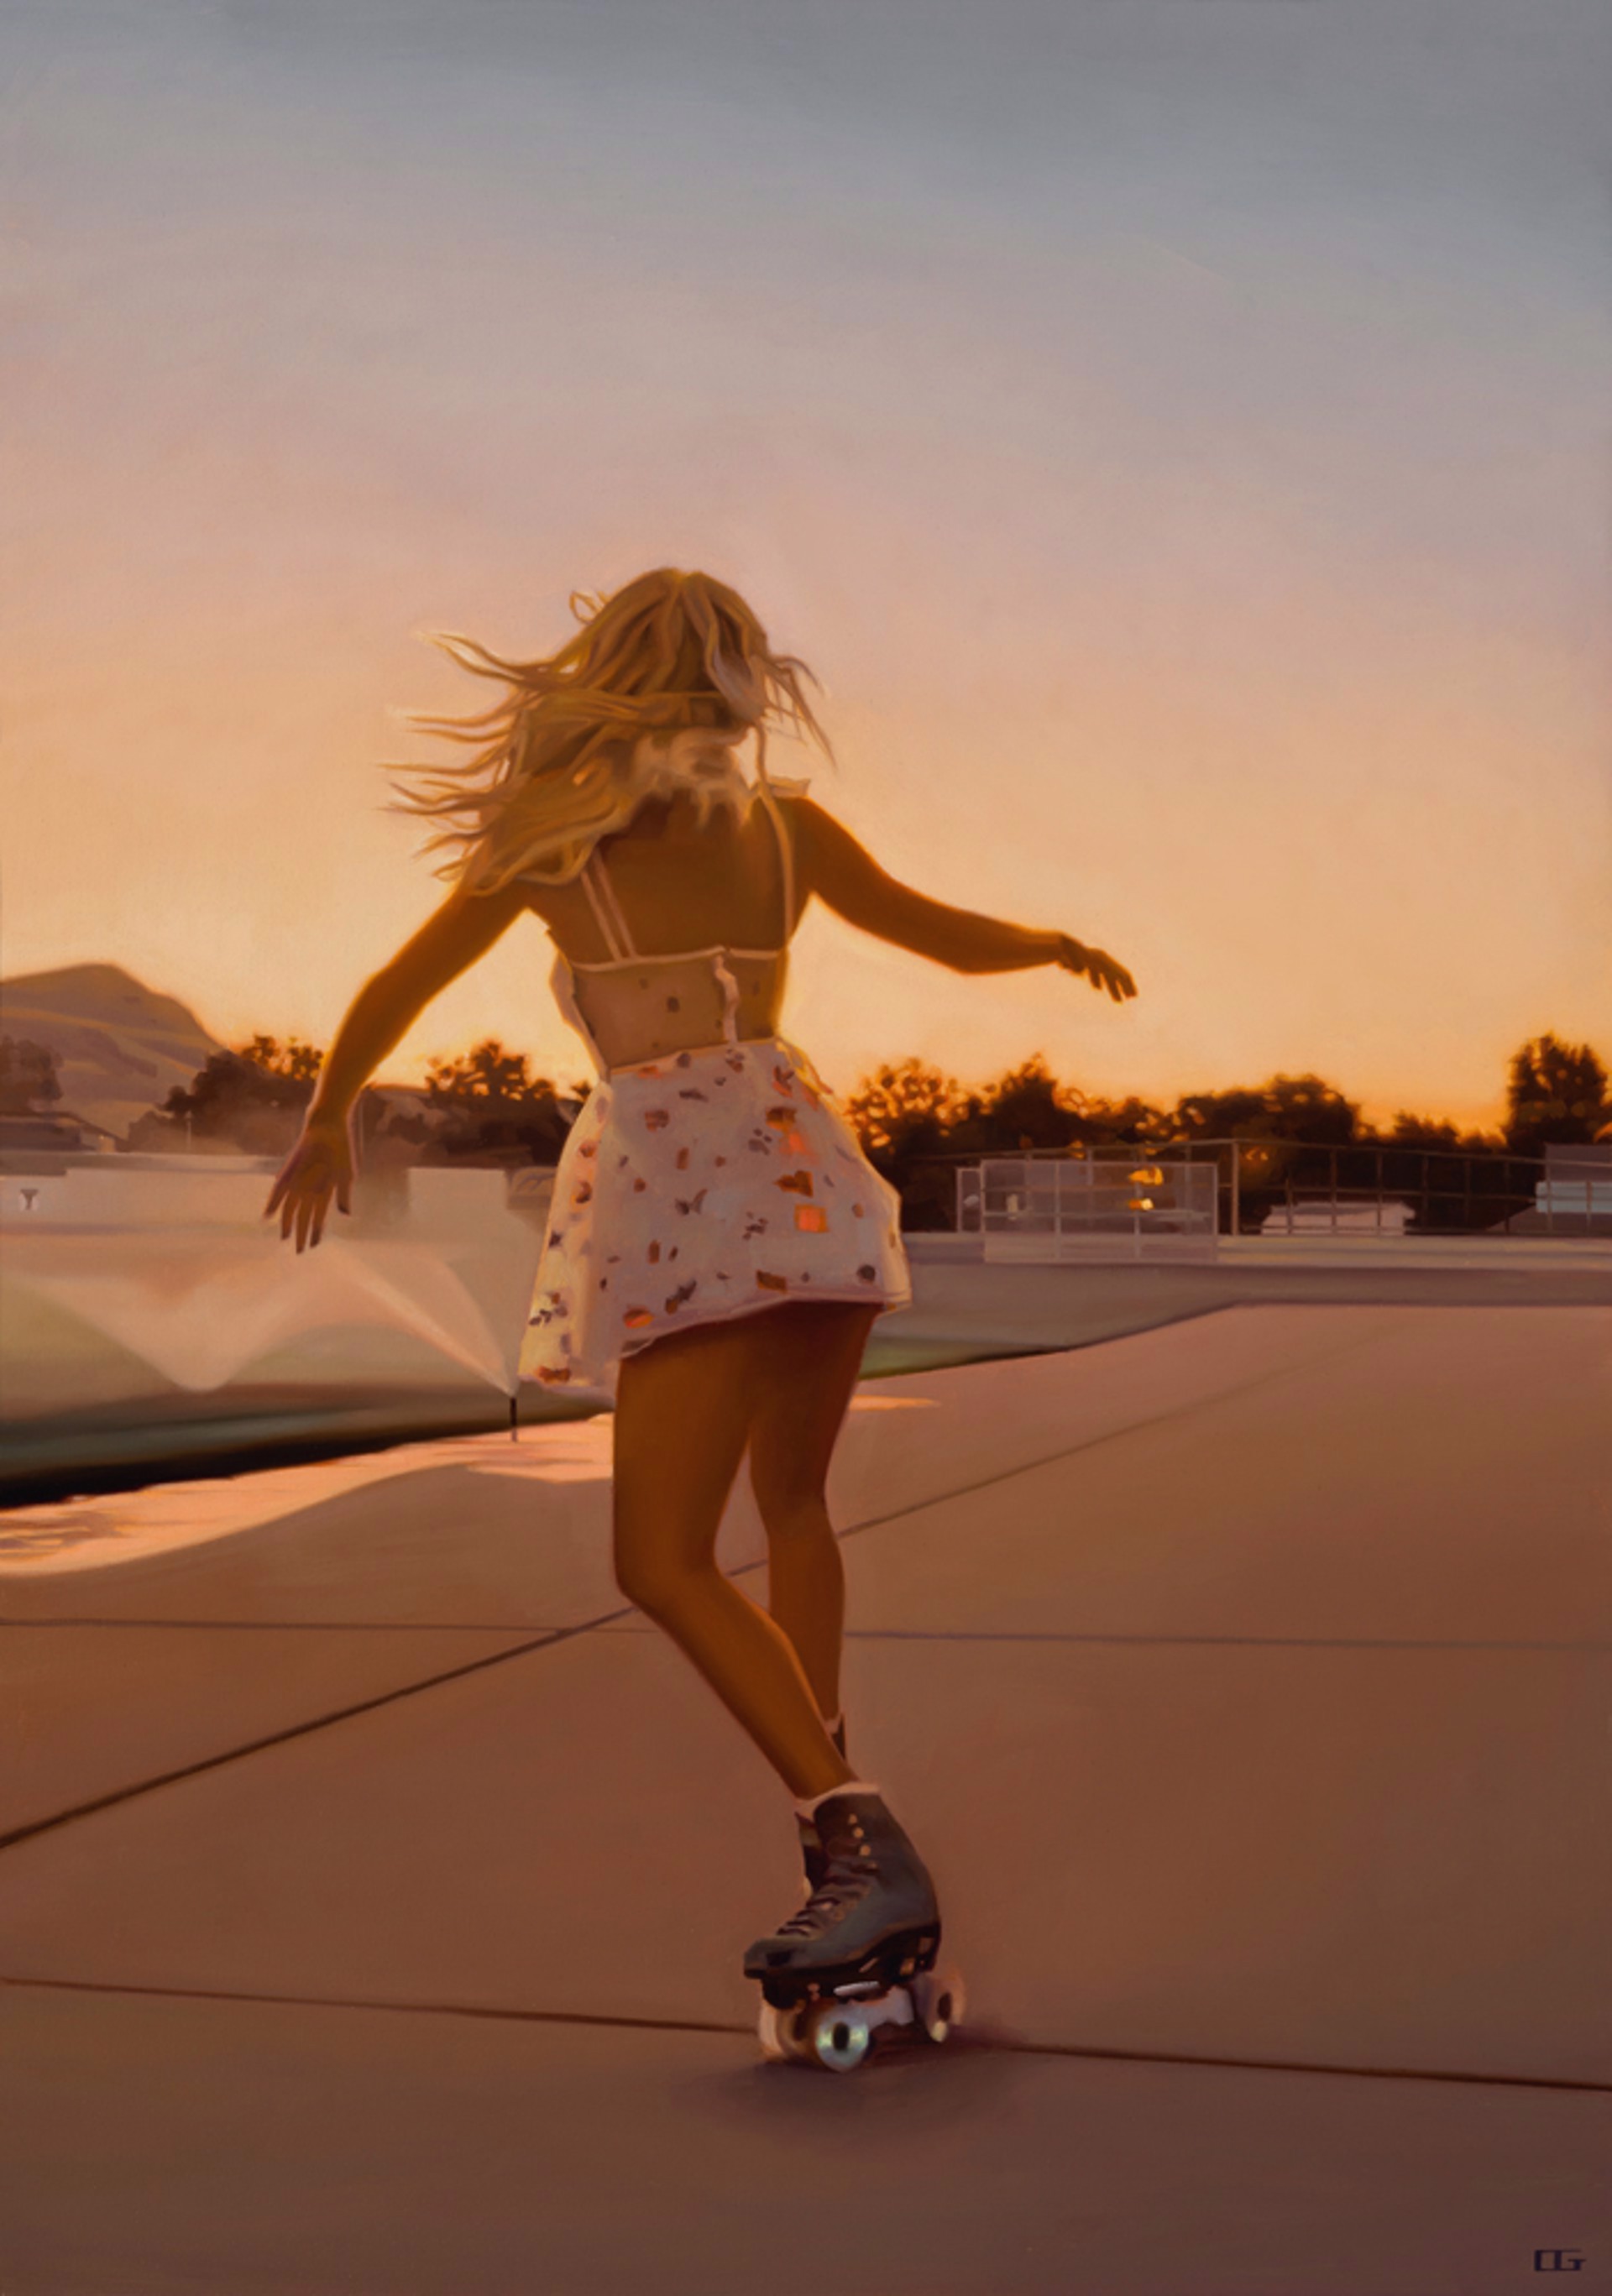 Skating In The Schoolyard by Carrie Graber